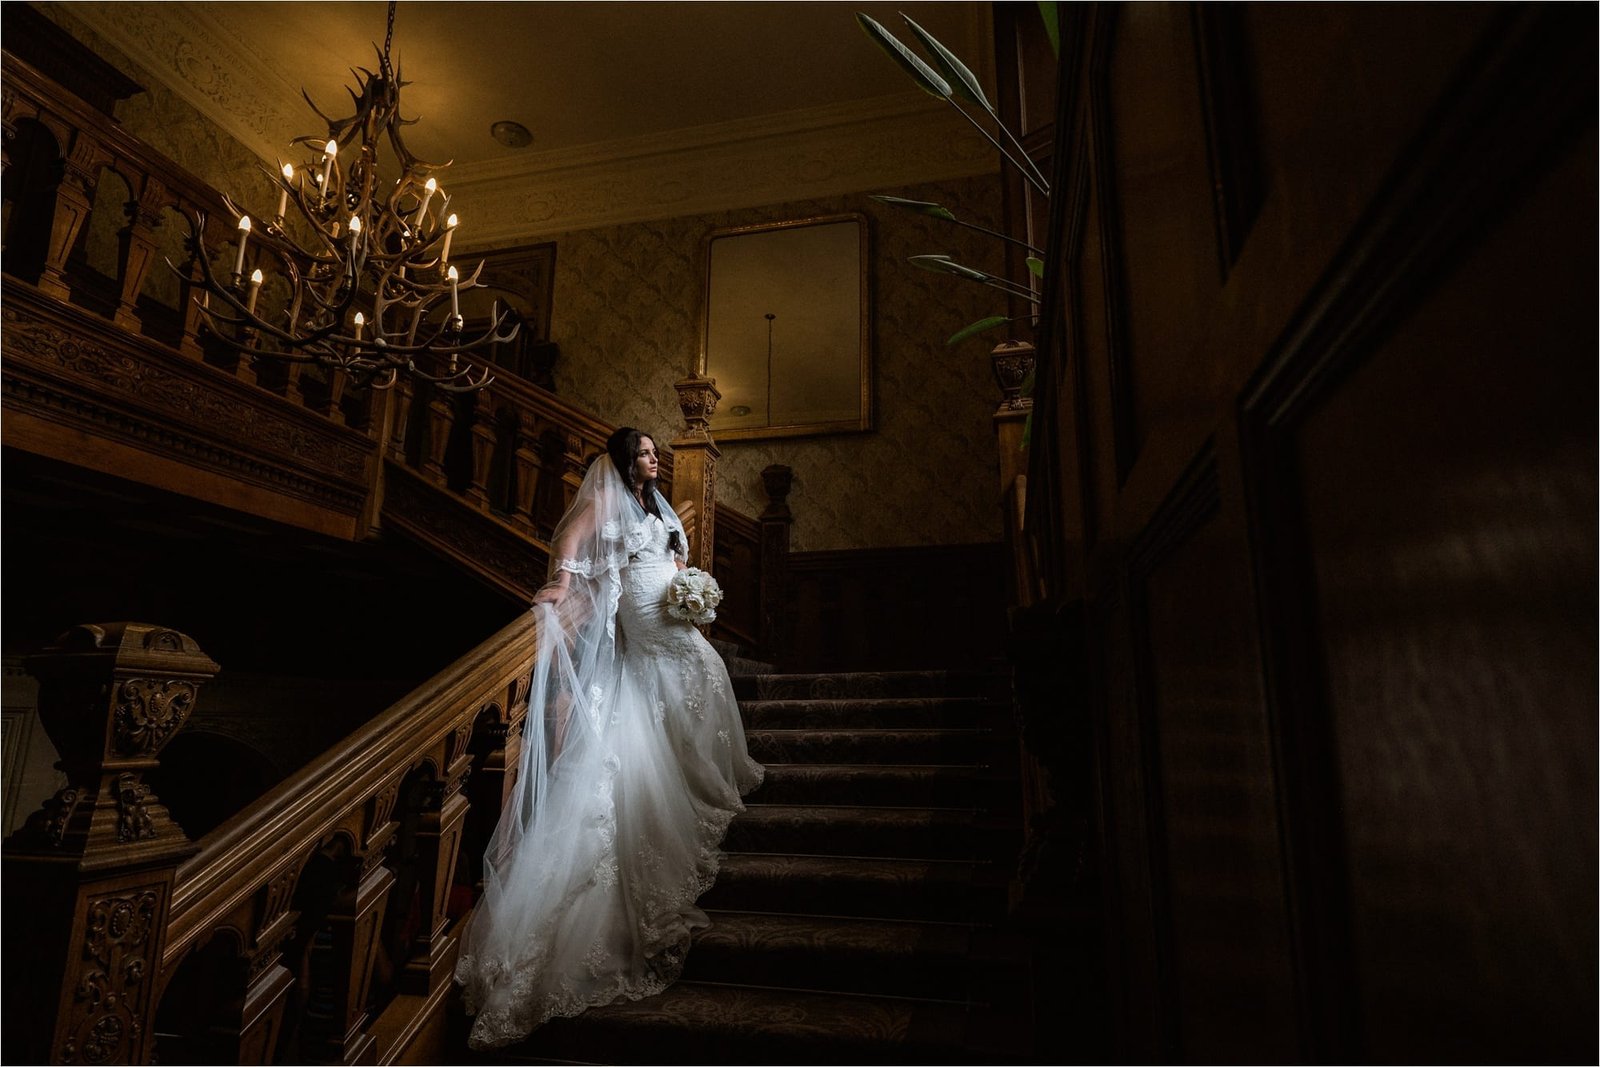 Wedding photography at bovey castle